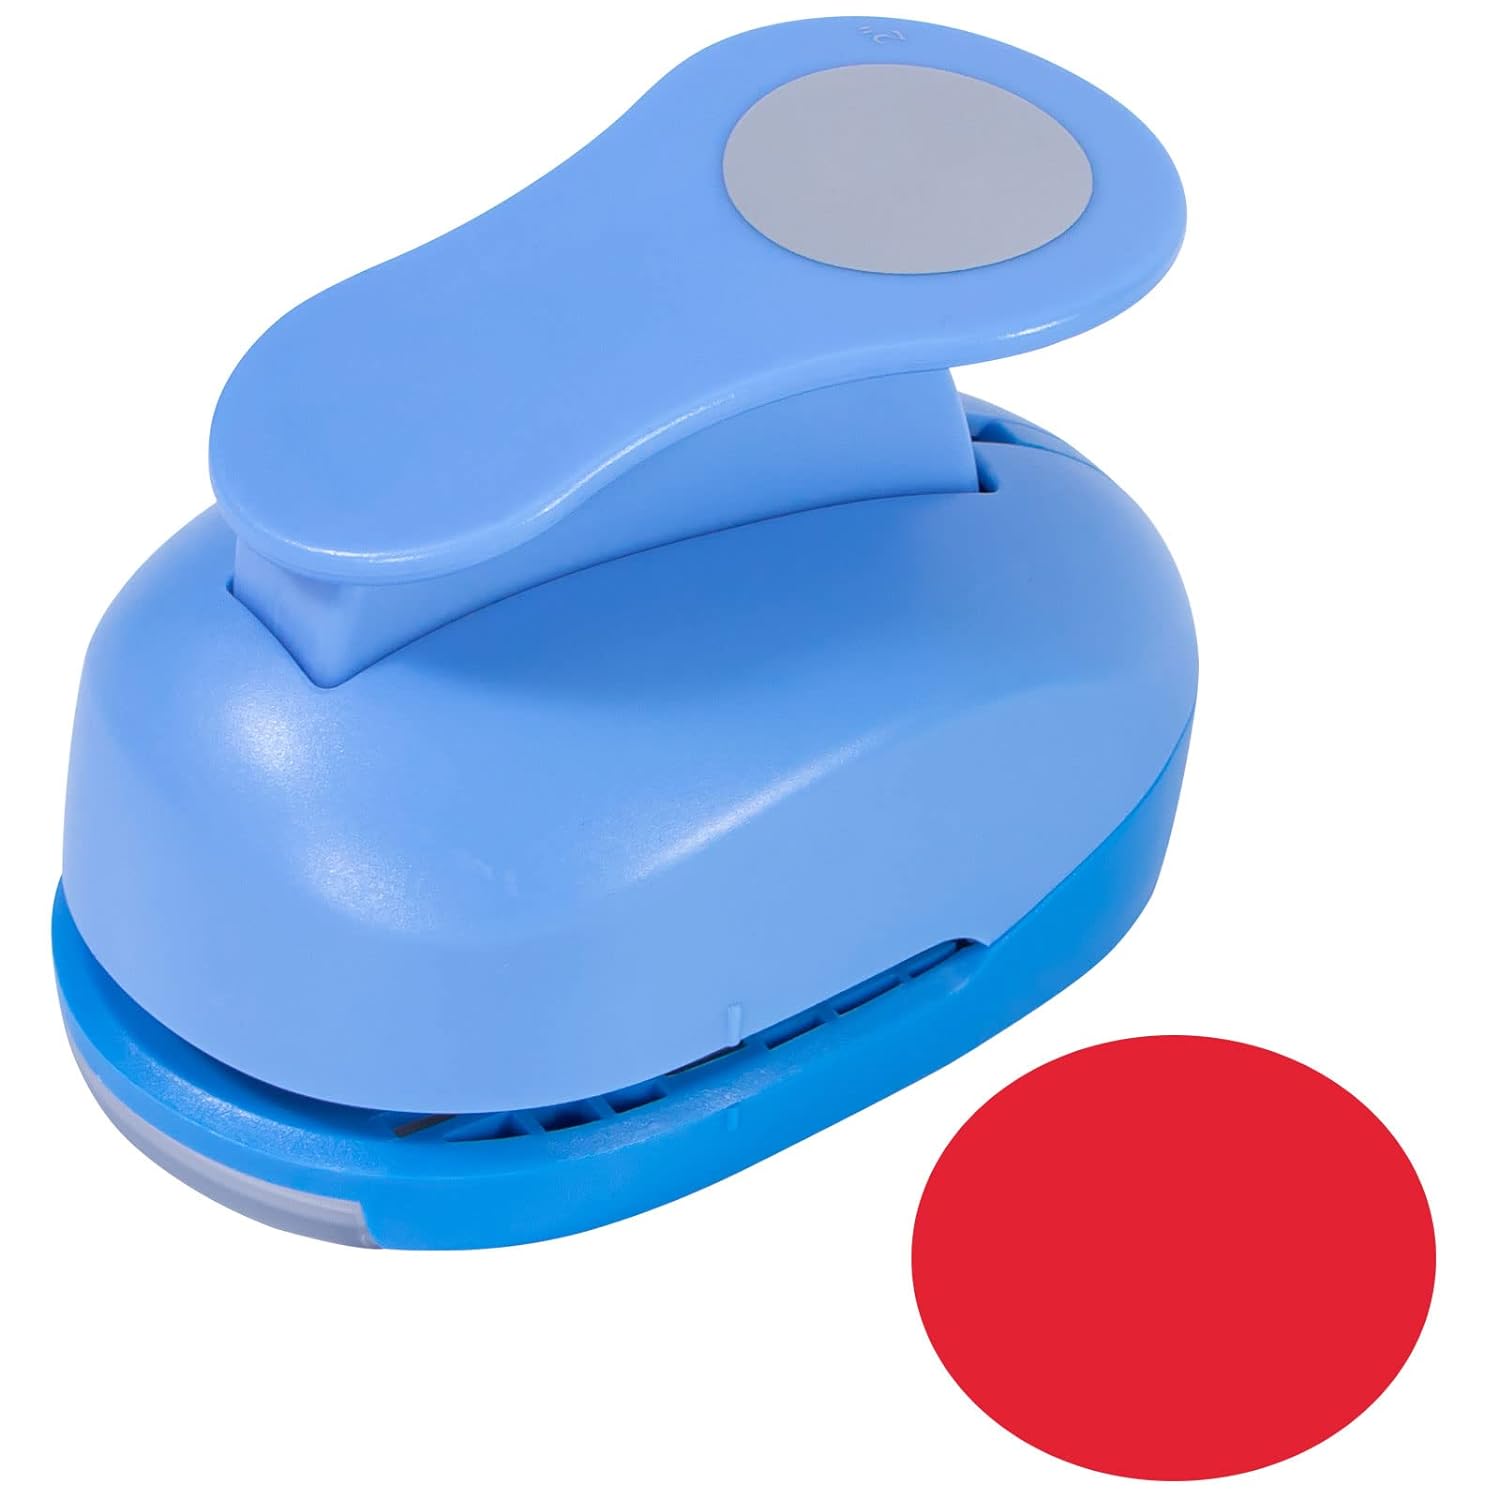 0.6/1 Inch Heart Punch, Heart Hole Paper Punch Hole Puncher Shape Punches